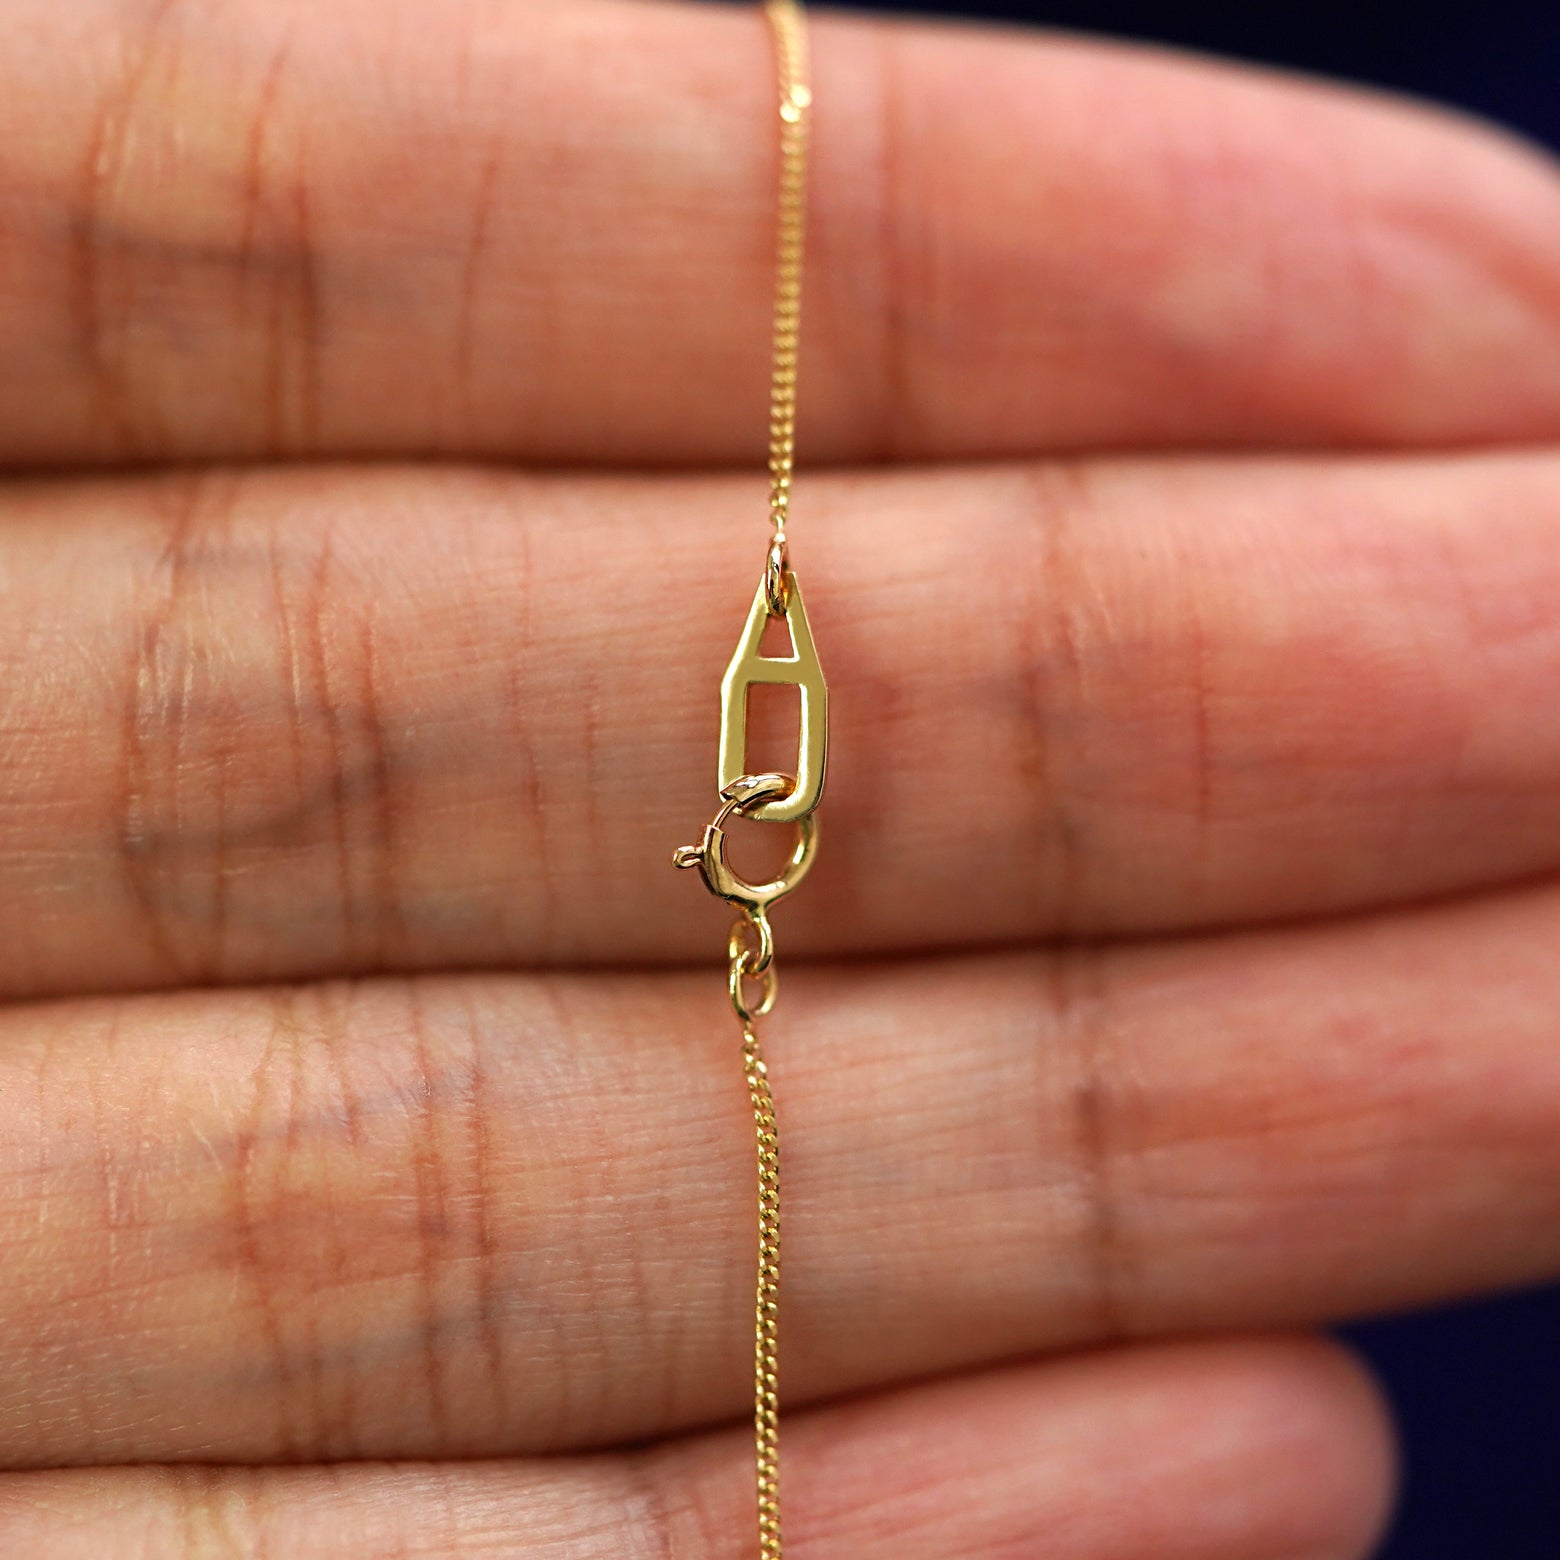 A model's hand holding an Automic Gold AU spring ring lock on a yellow gold Essential Chain